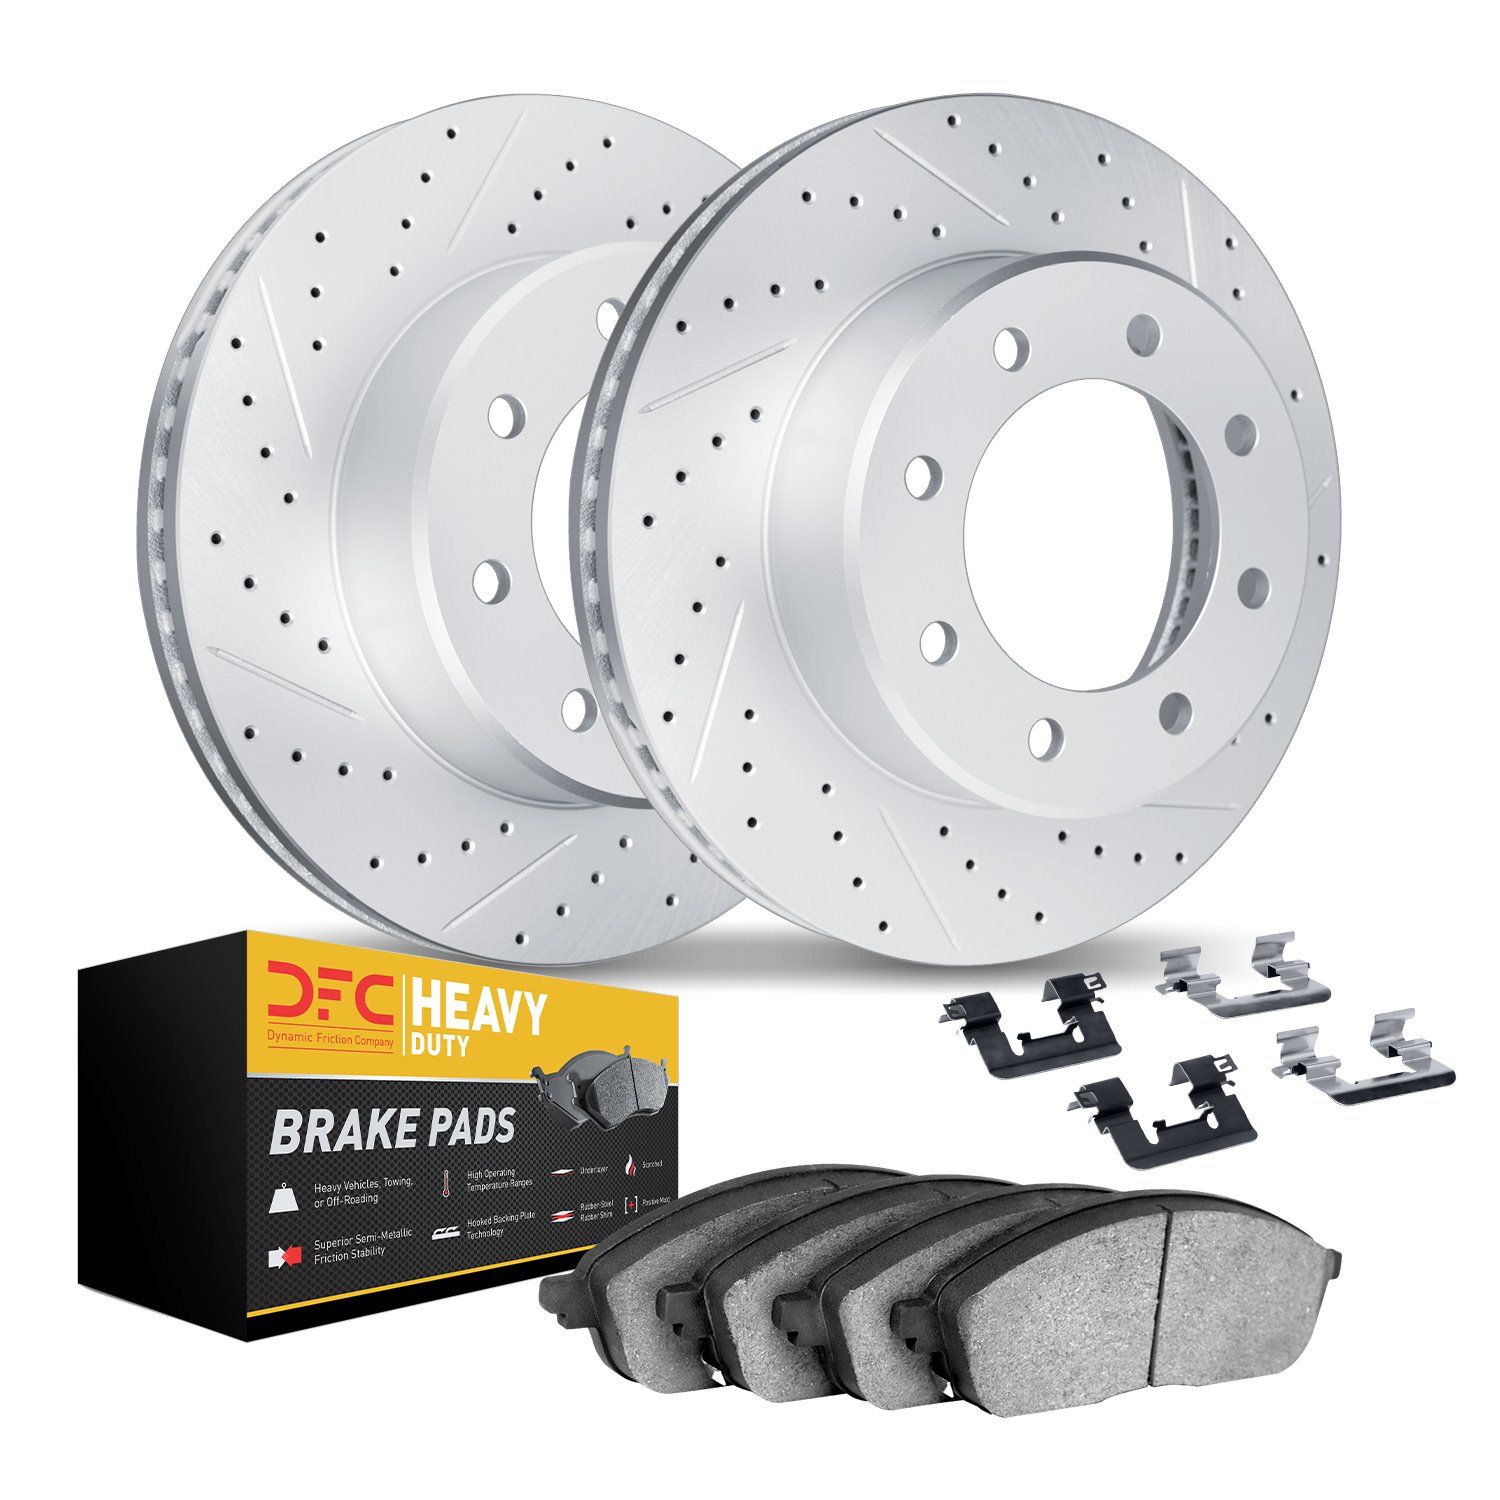 2212-99106 Geoperformance Drilled/Slotted Rotors w/Heavy-Duty Pads Kit & Hardware, 1999-2002 Ford/Lincoln/Mercury/Mazda, Positio